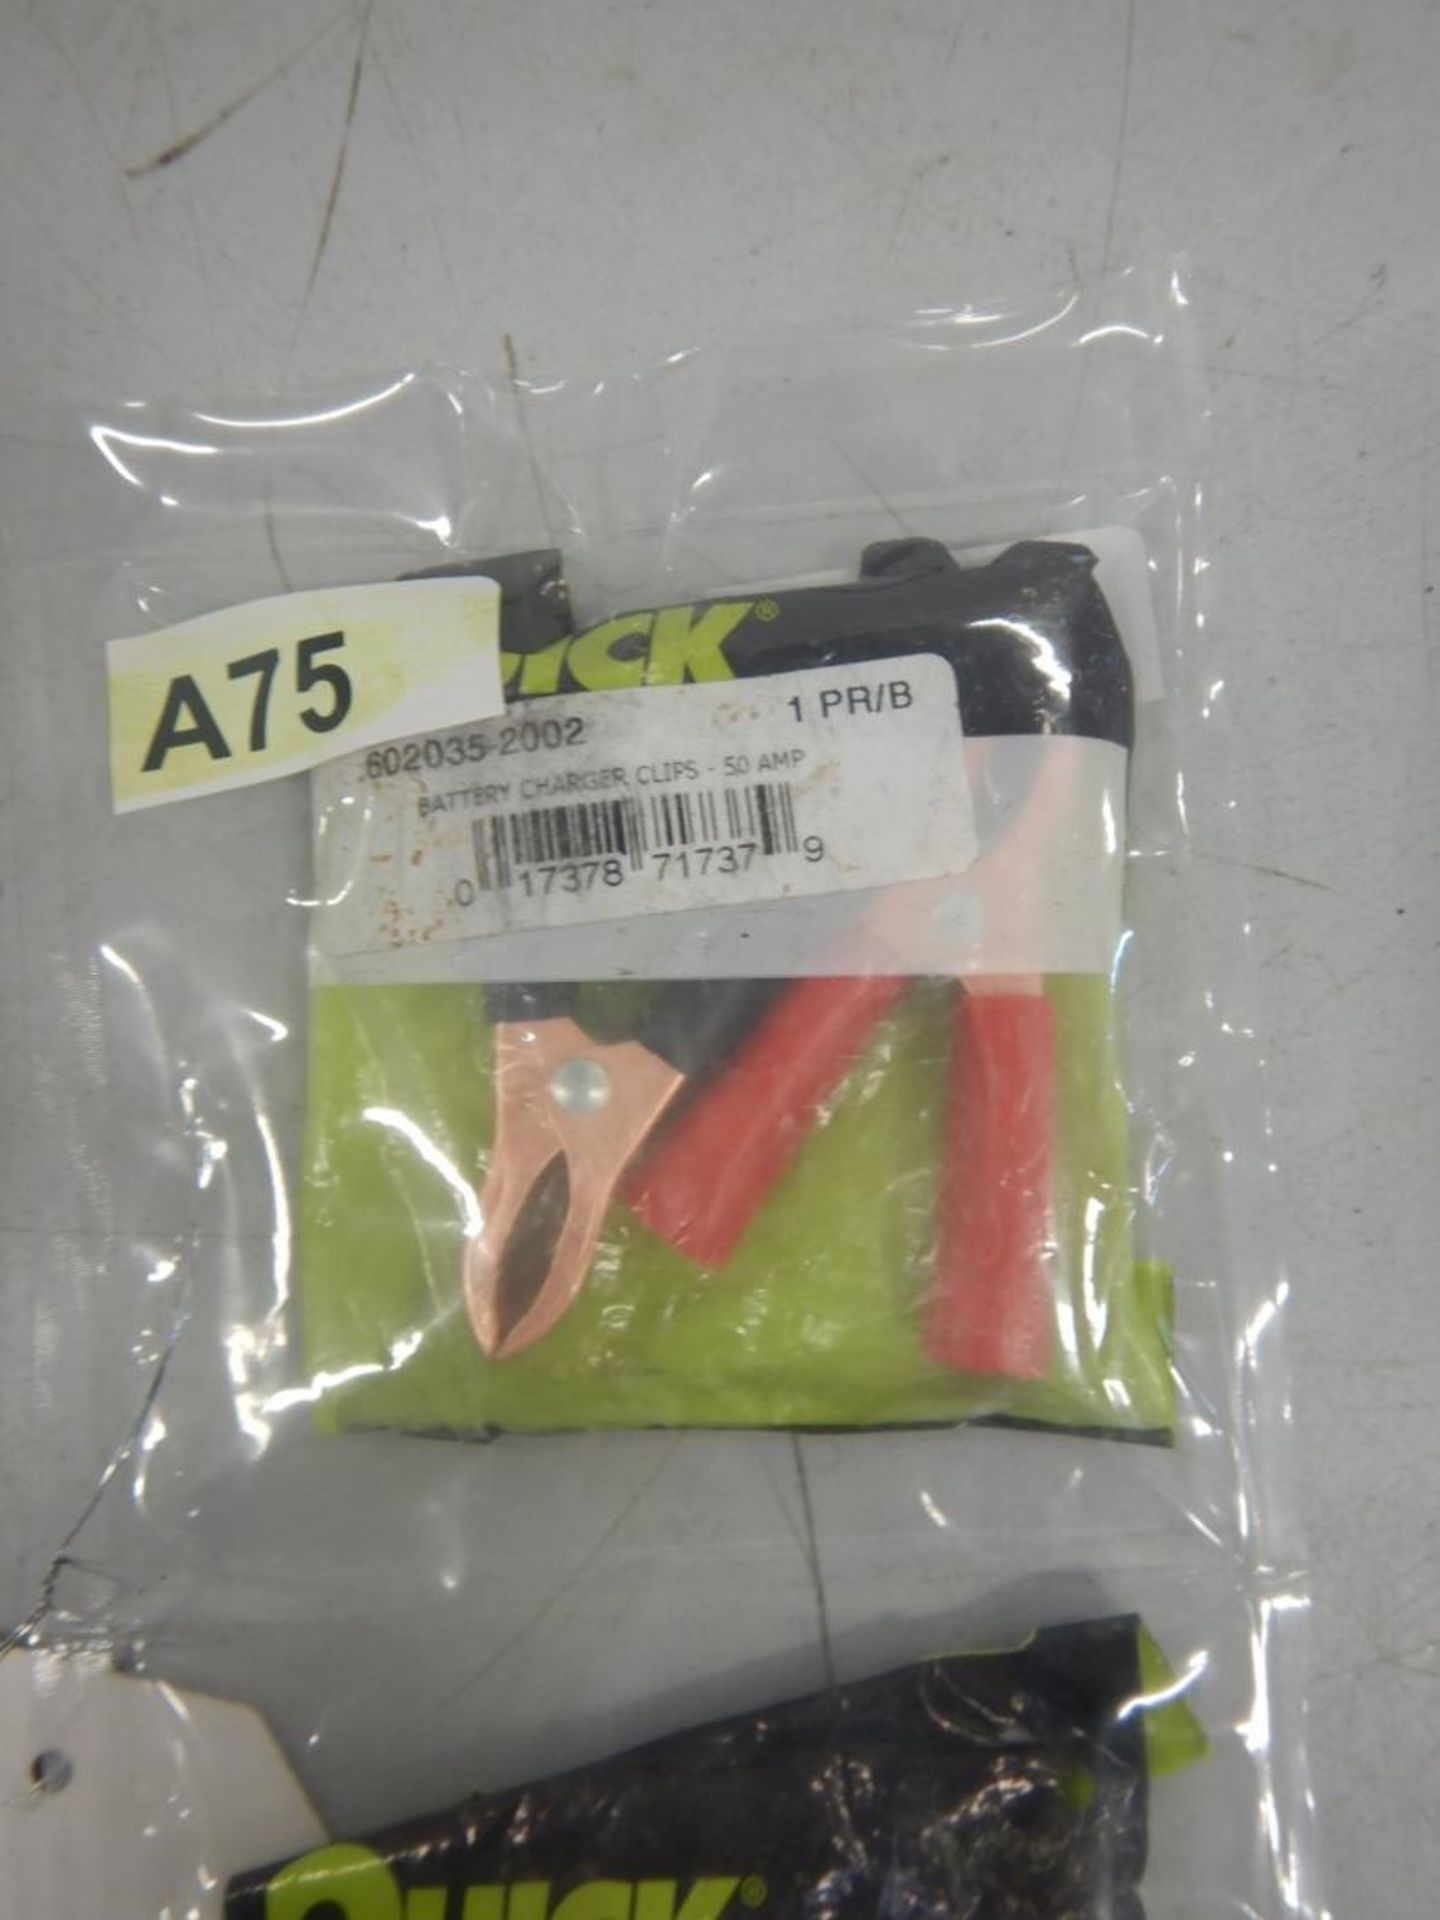 A75 - BATTERY CHARGER CLIPS (1 PR/BAG, X2 BAGS) - Image 3 of 3